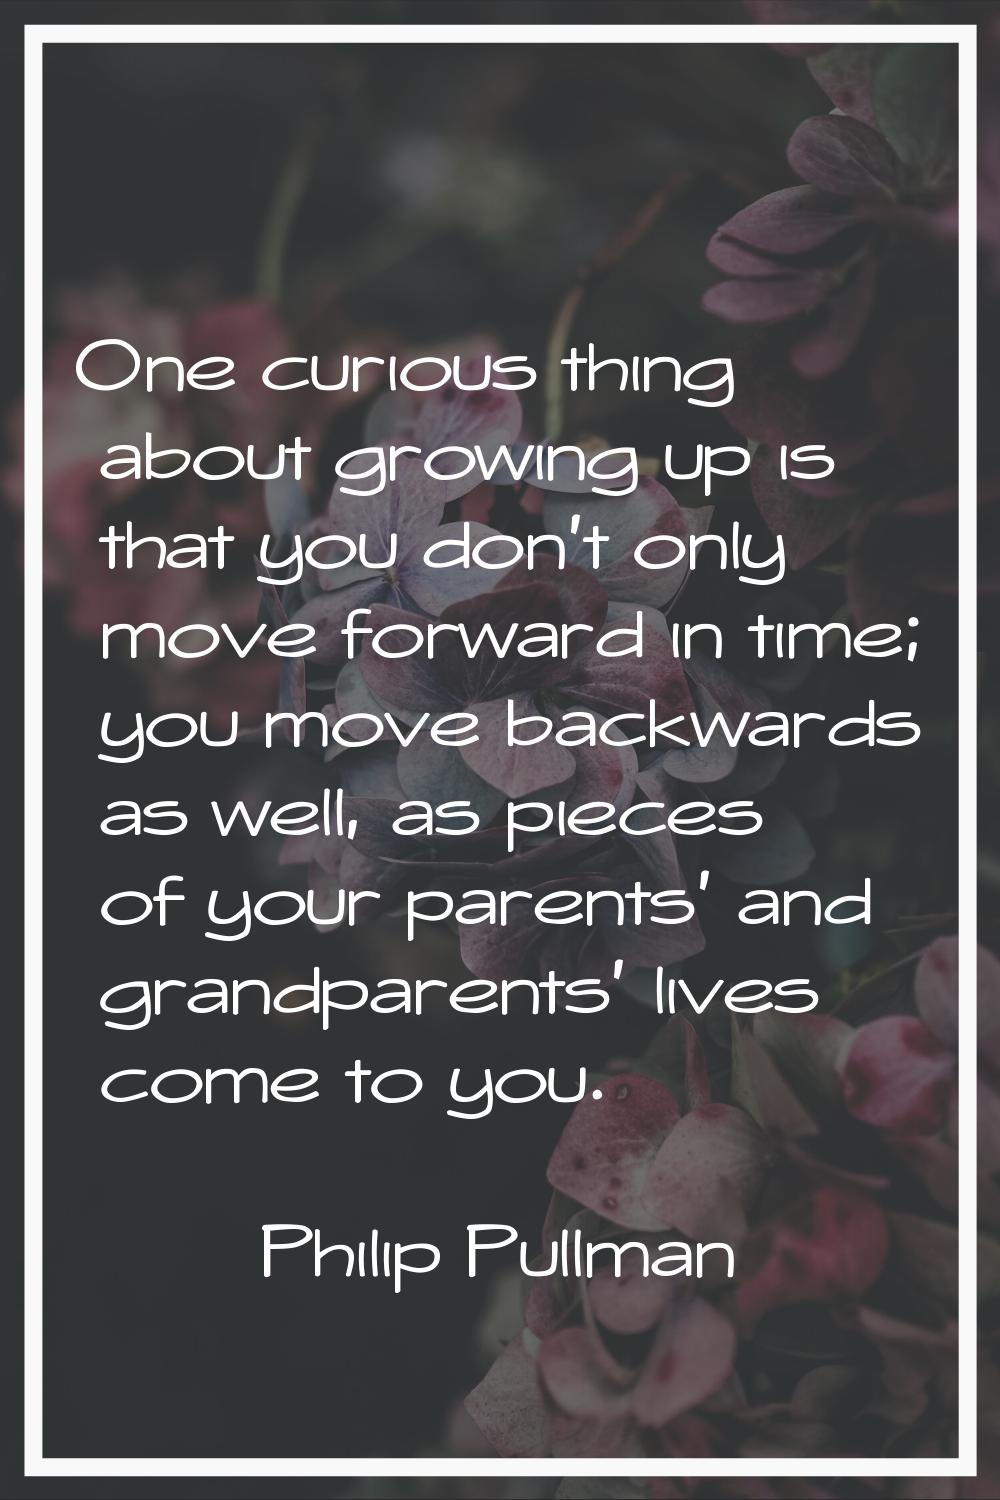 One curious thing about growing up is that you don't only move forward in time; you move backwards 